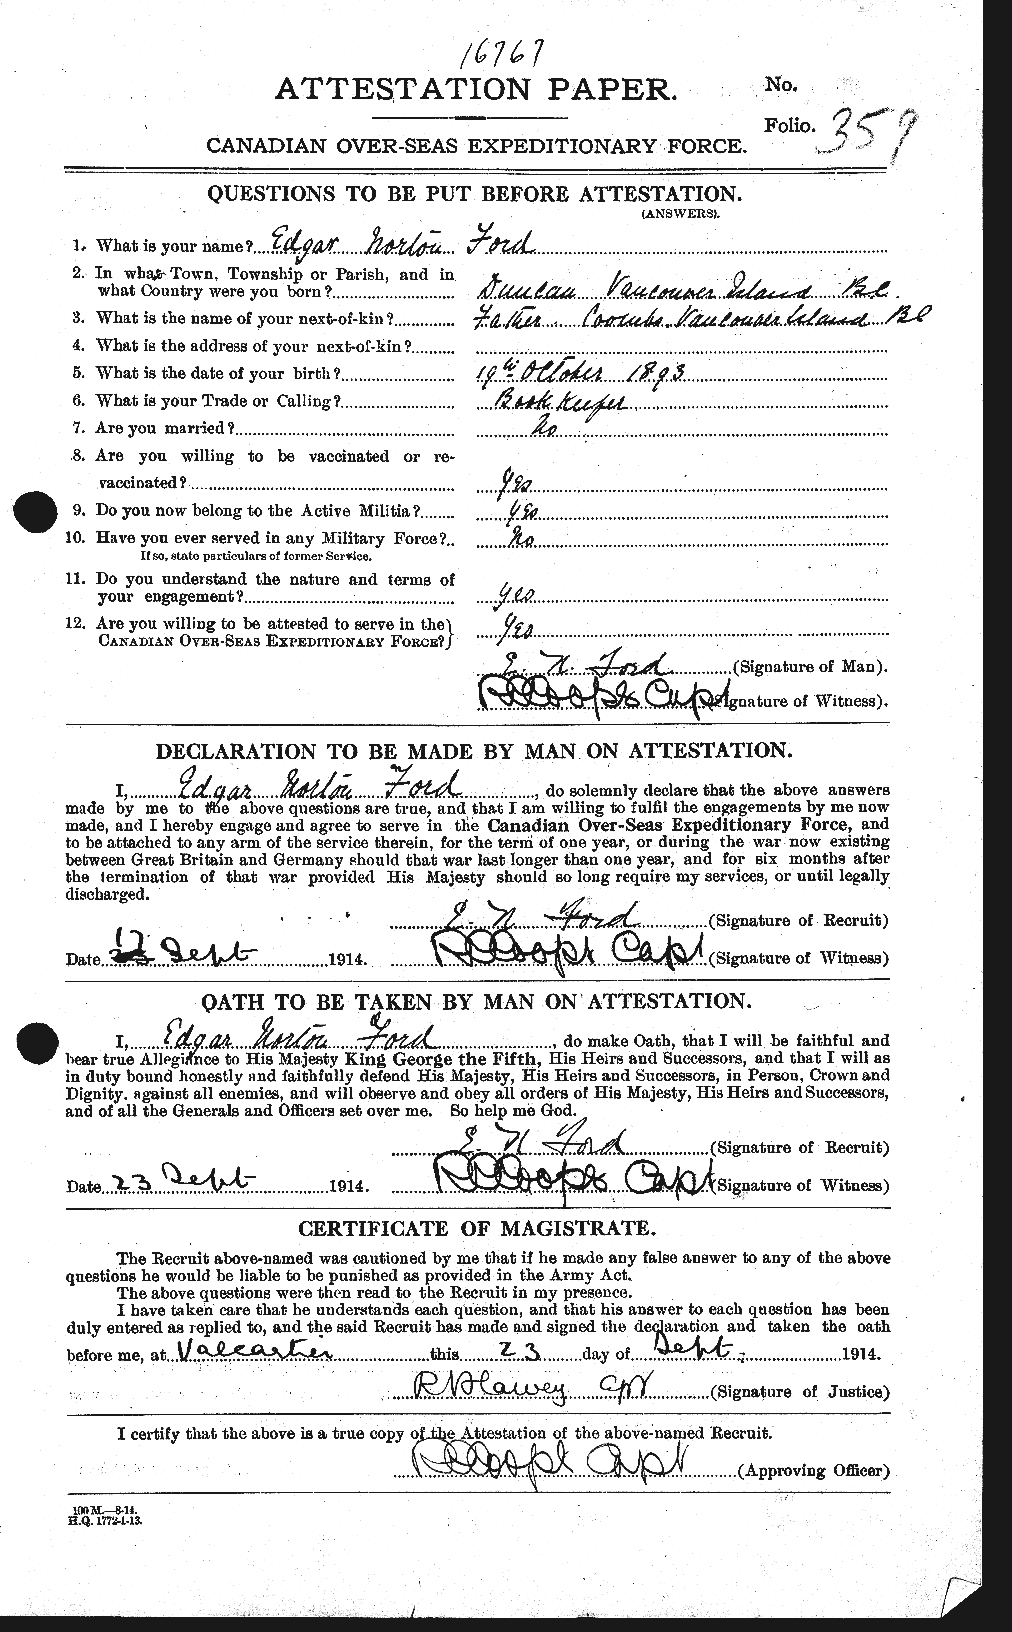 Personnel Records of the First World War - CEF 329182a